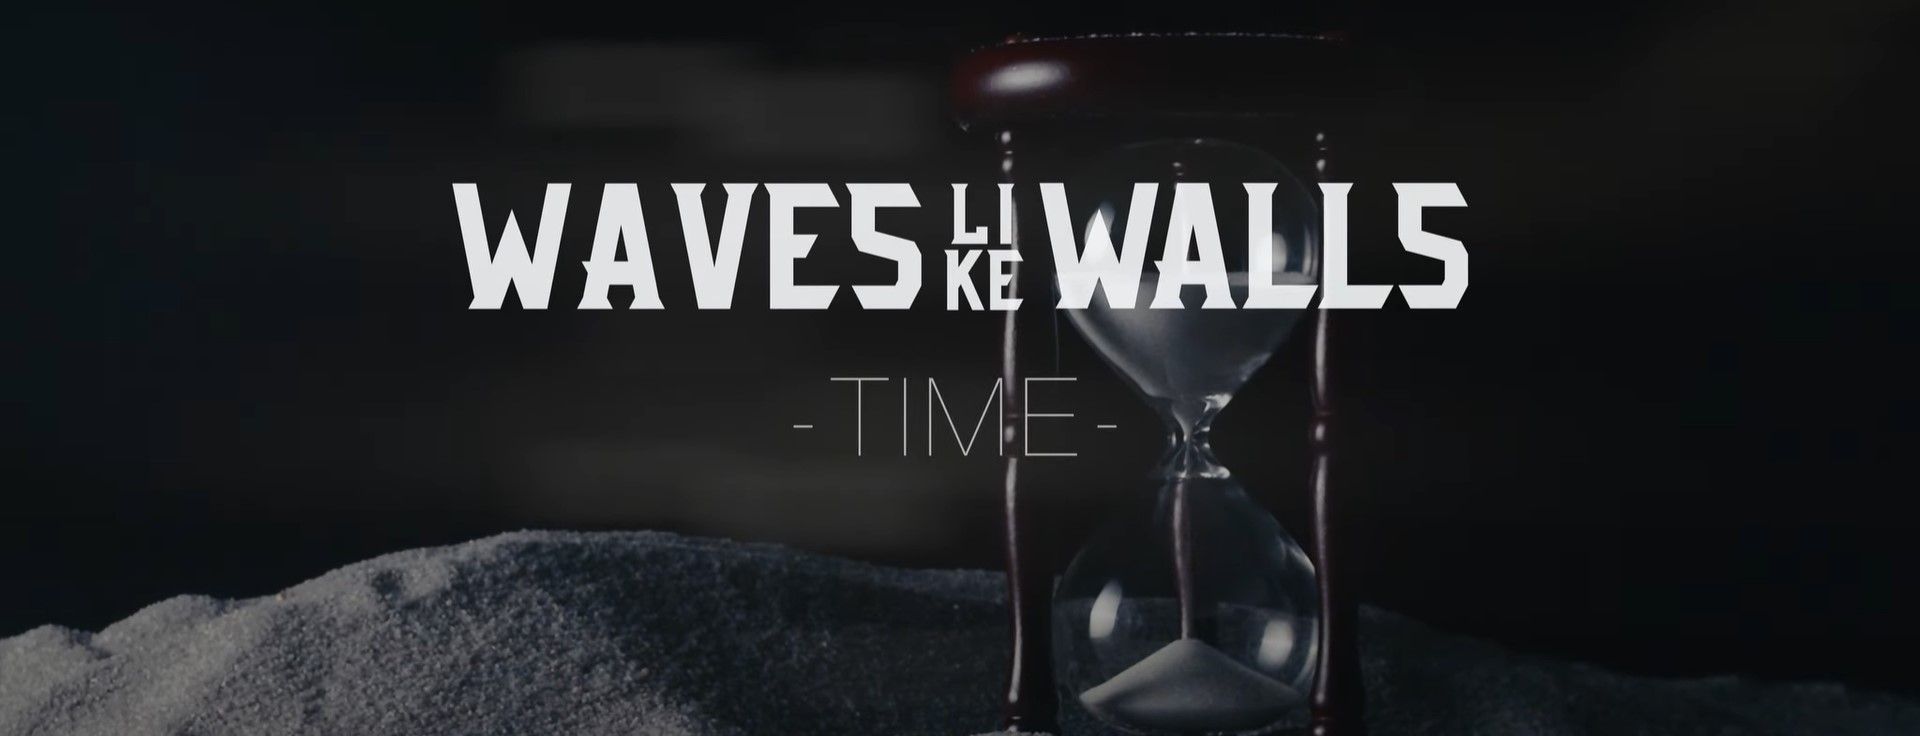 Waves Like Walls - Time (Official)